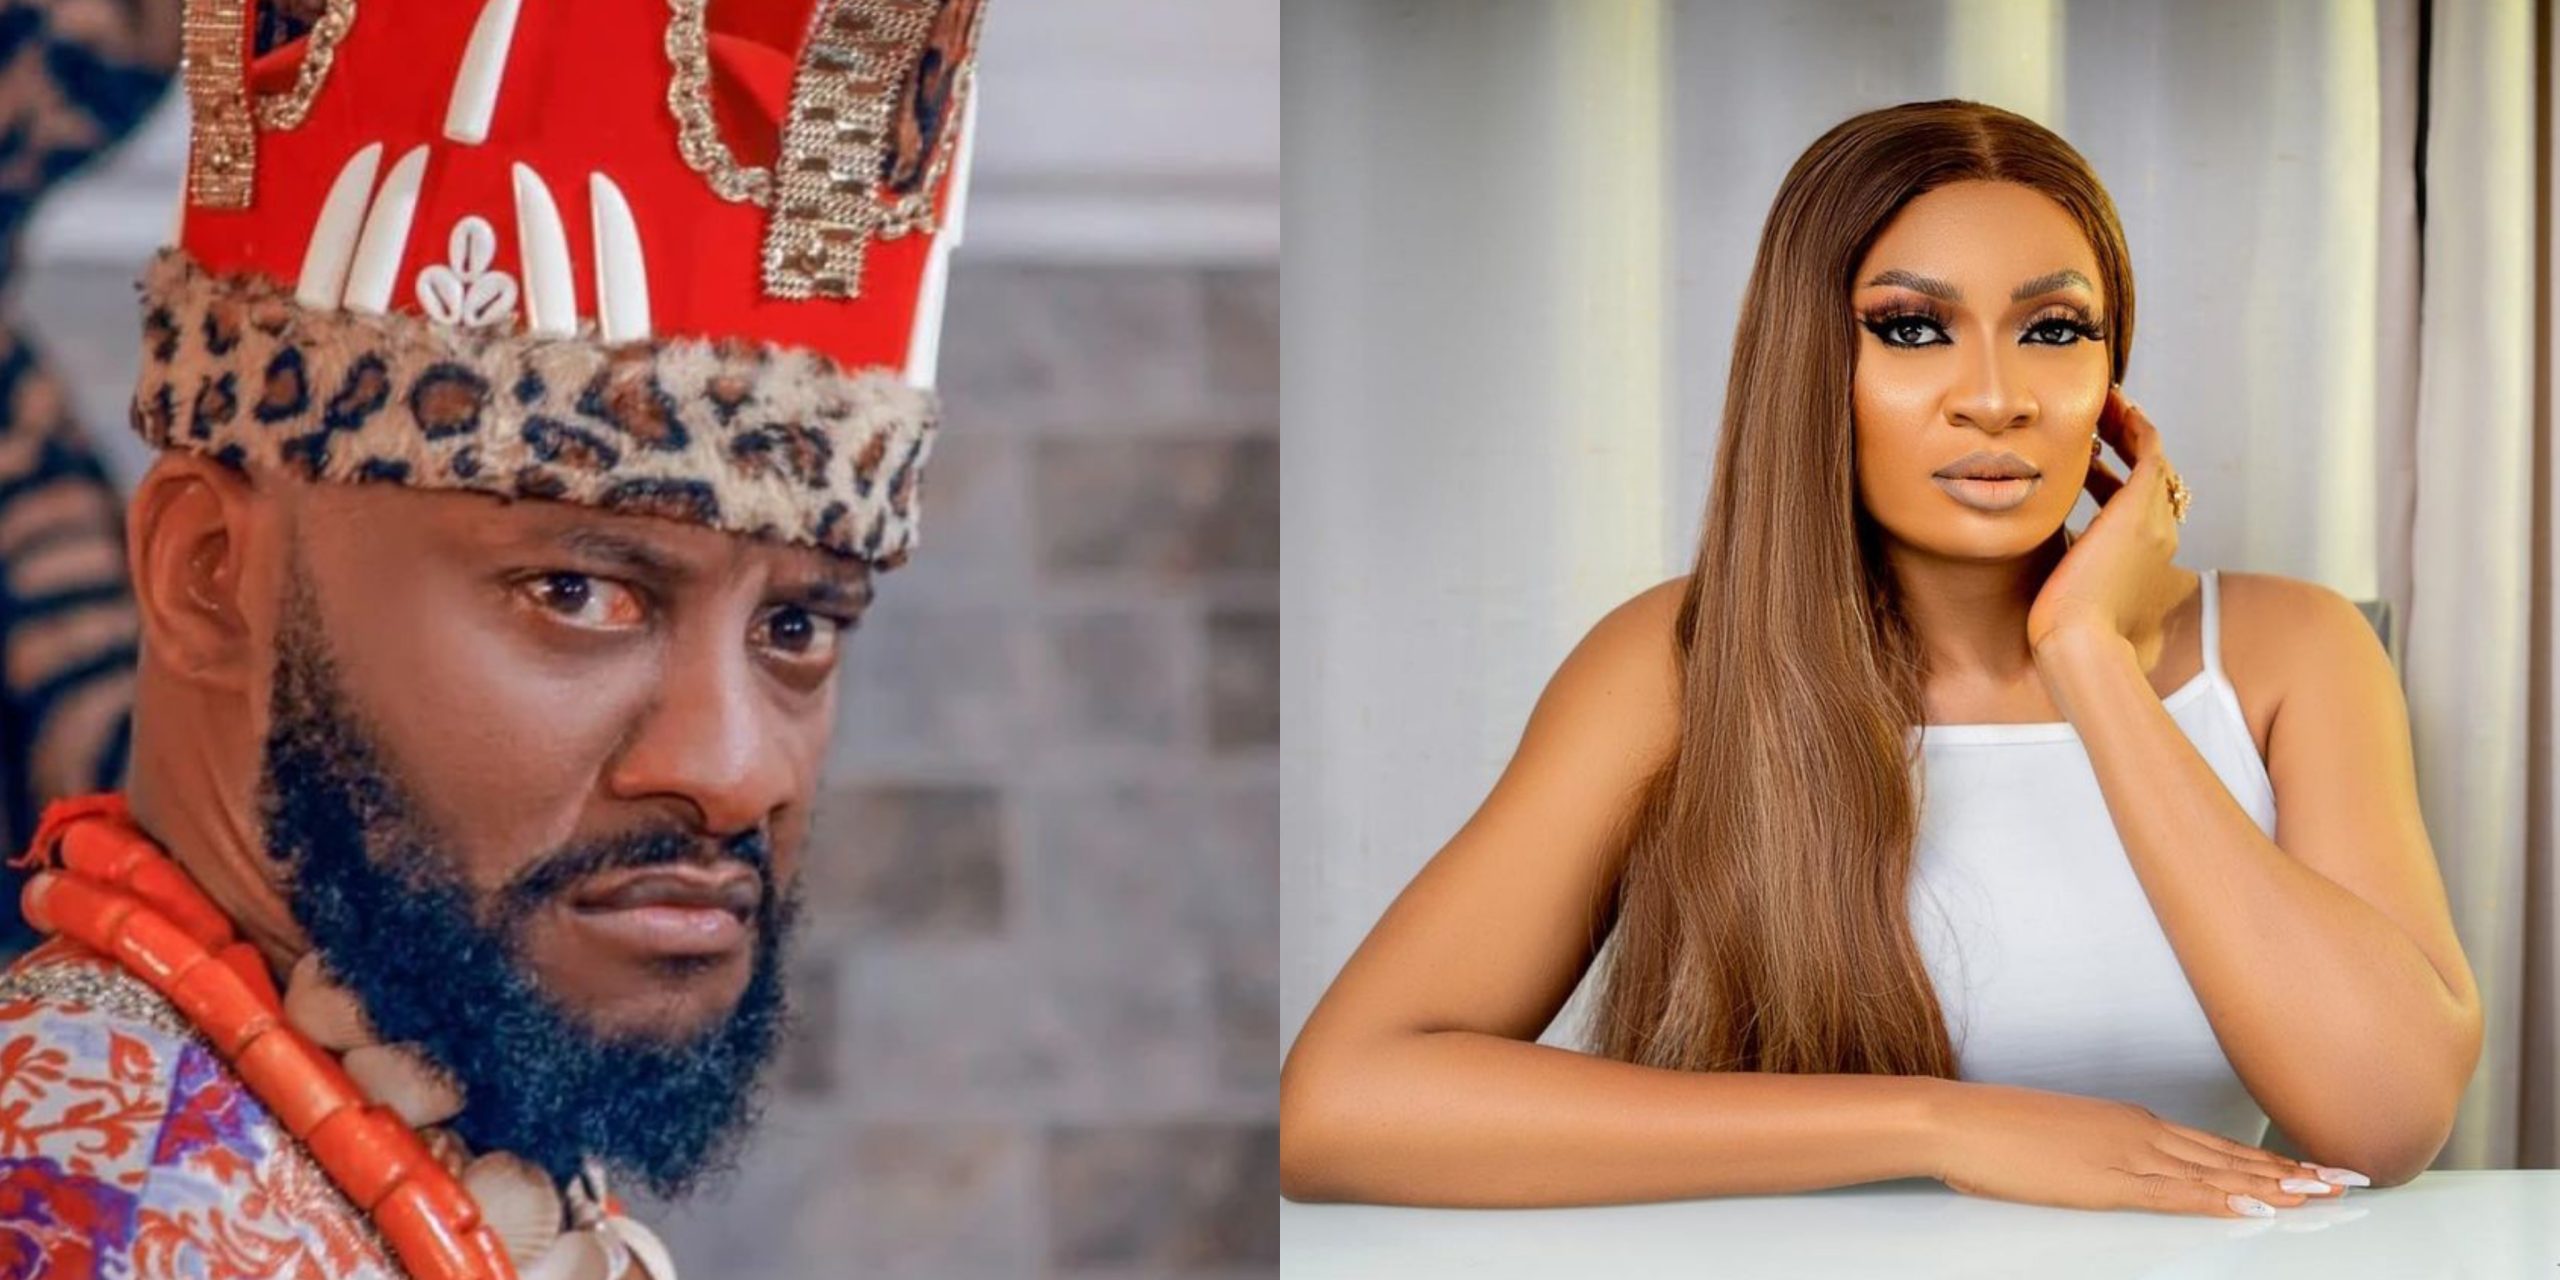 “2023 Stole Your Flesh And Blood, But You Had Time To Do Breast Enlargement Surgery” – Yul Edochie Knocks Estranged Wife